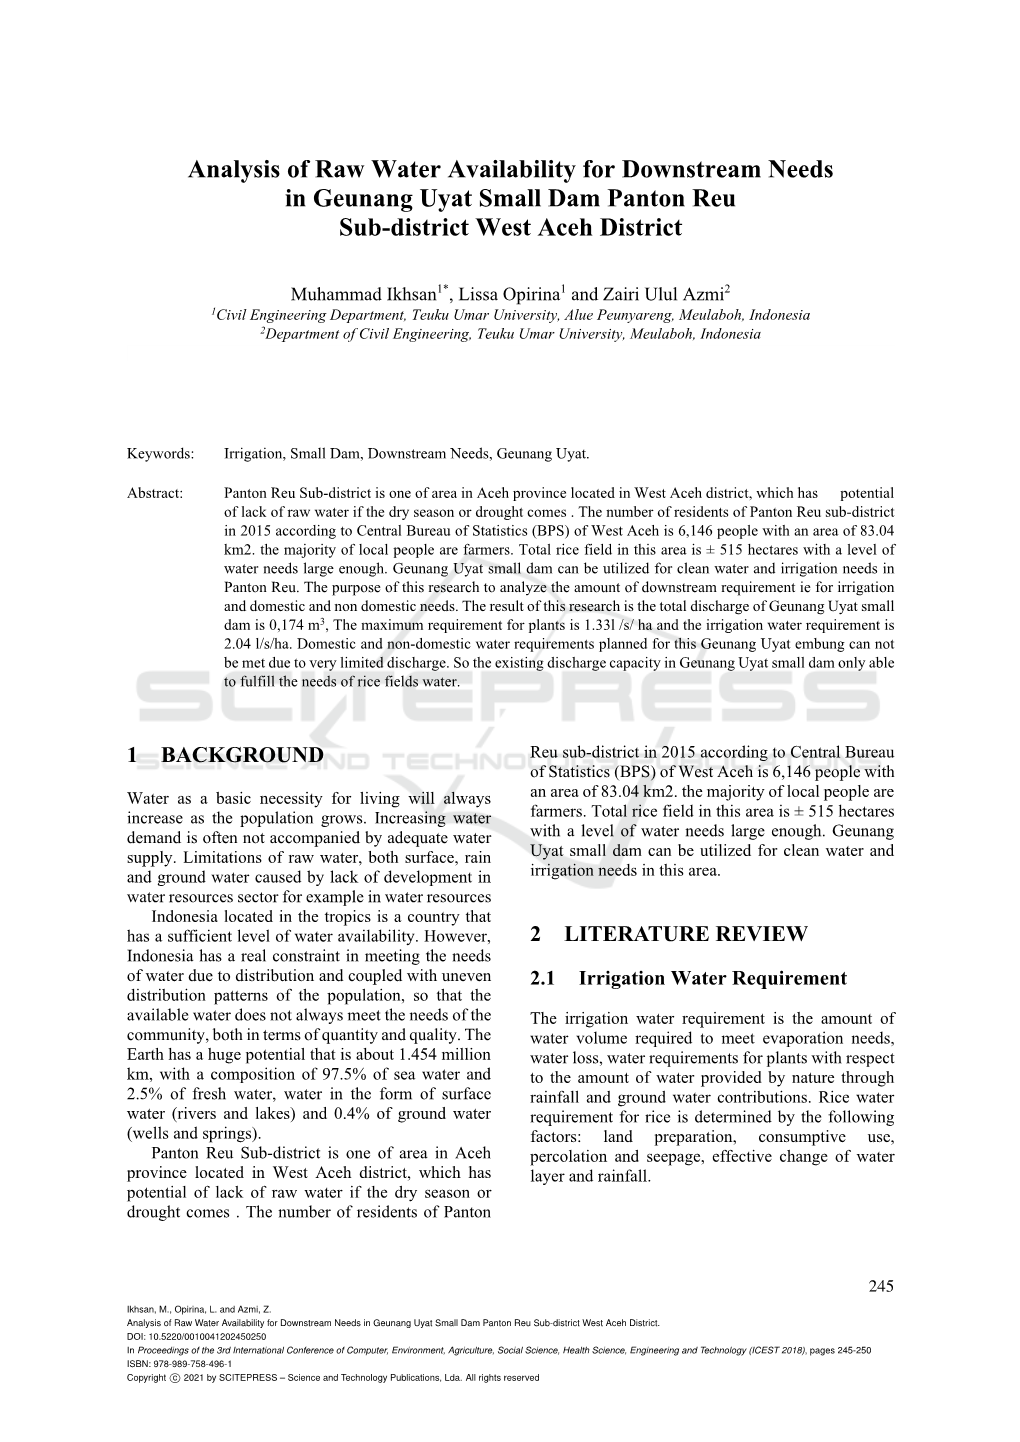 Analysis of Raw Water Availability for Downstream Needs in Geunang Uyat Small Dam Panton Reu Sub-District West Aceh District